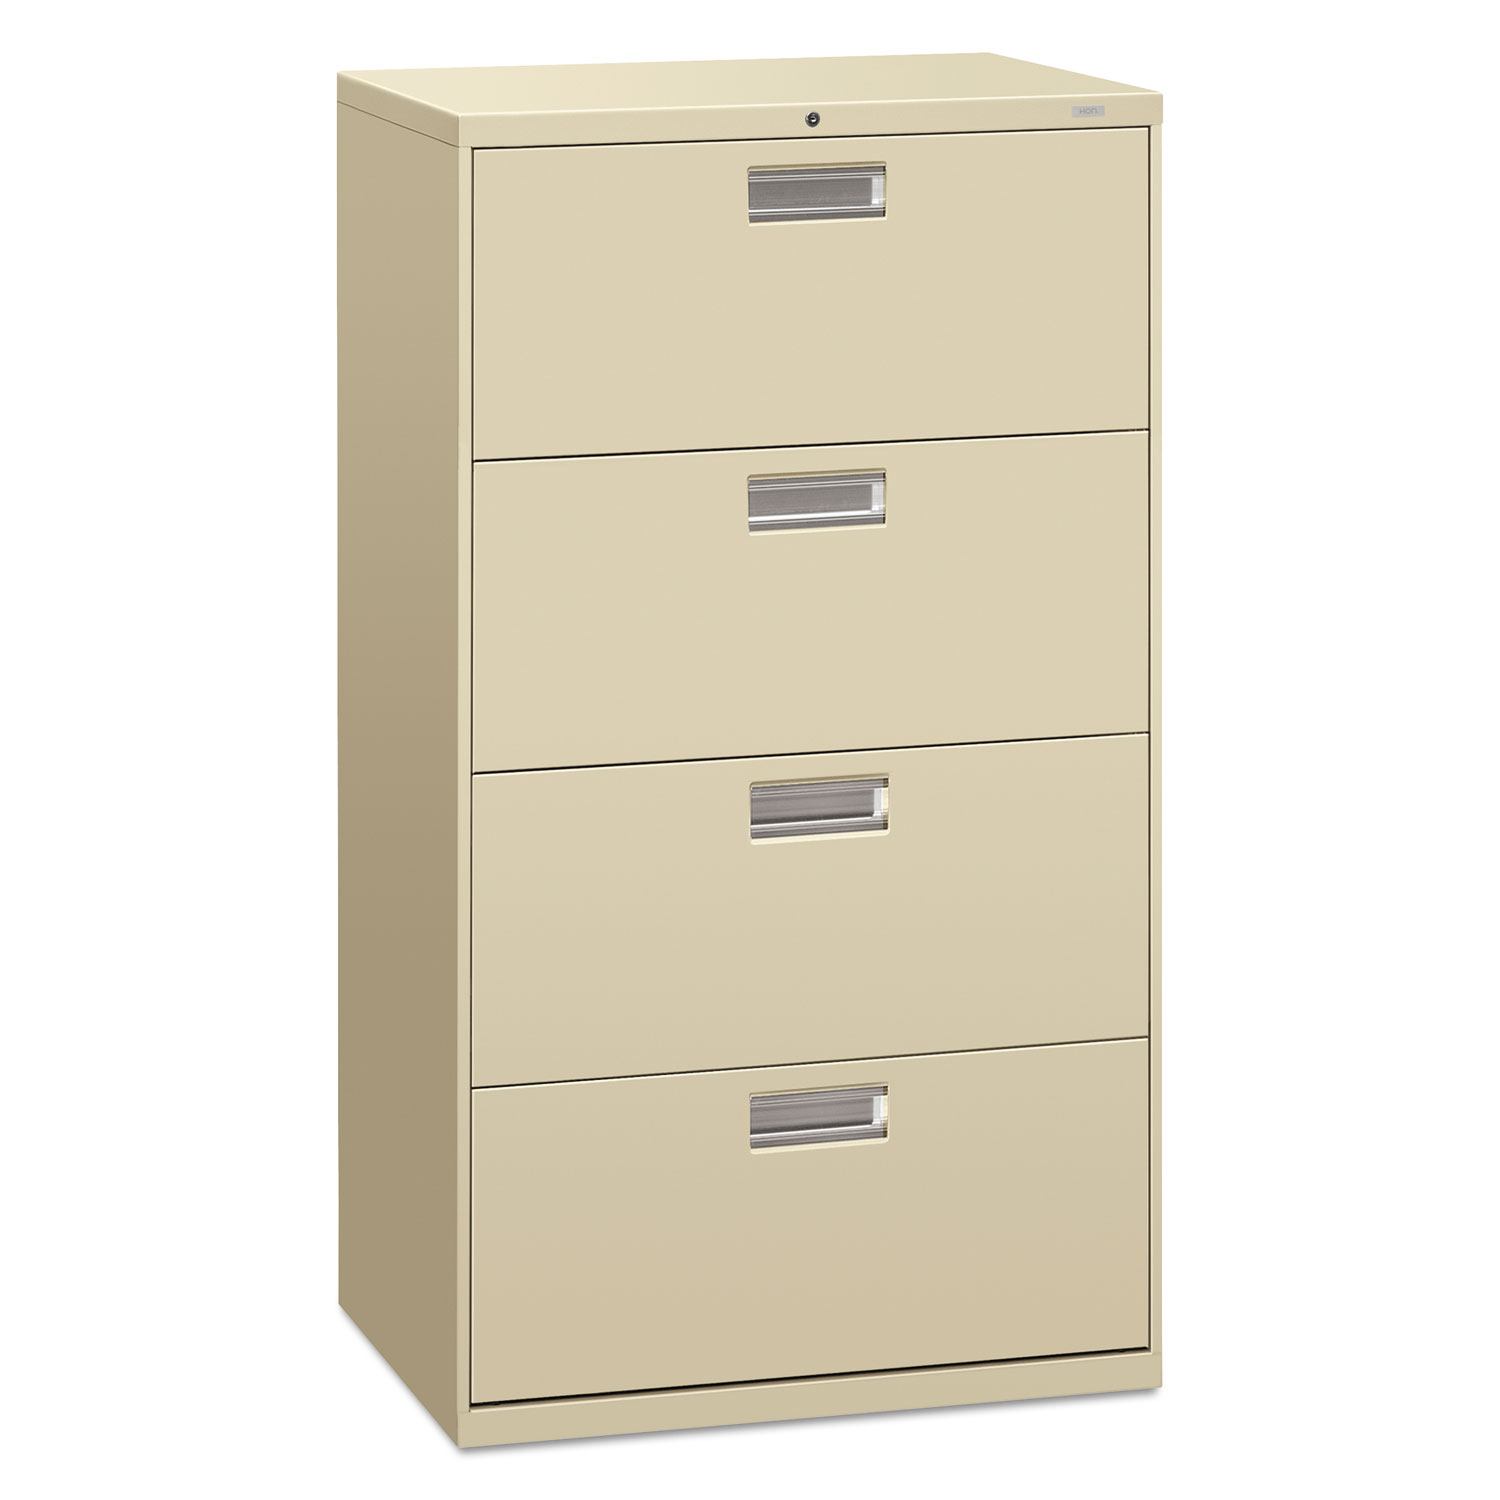 600 Series Four-Drawer Lateral File, 30w x 19-1/4d, Putty